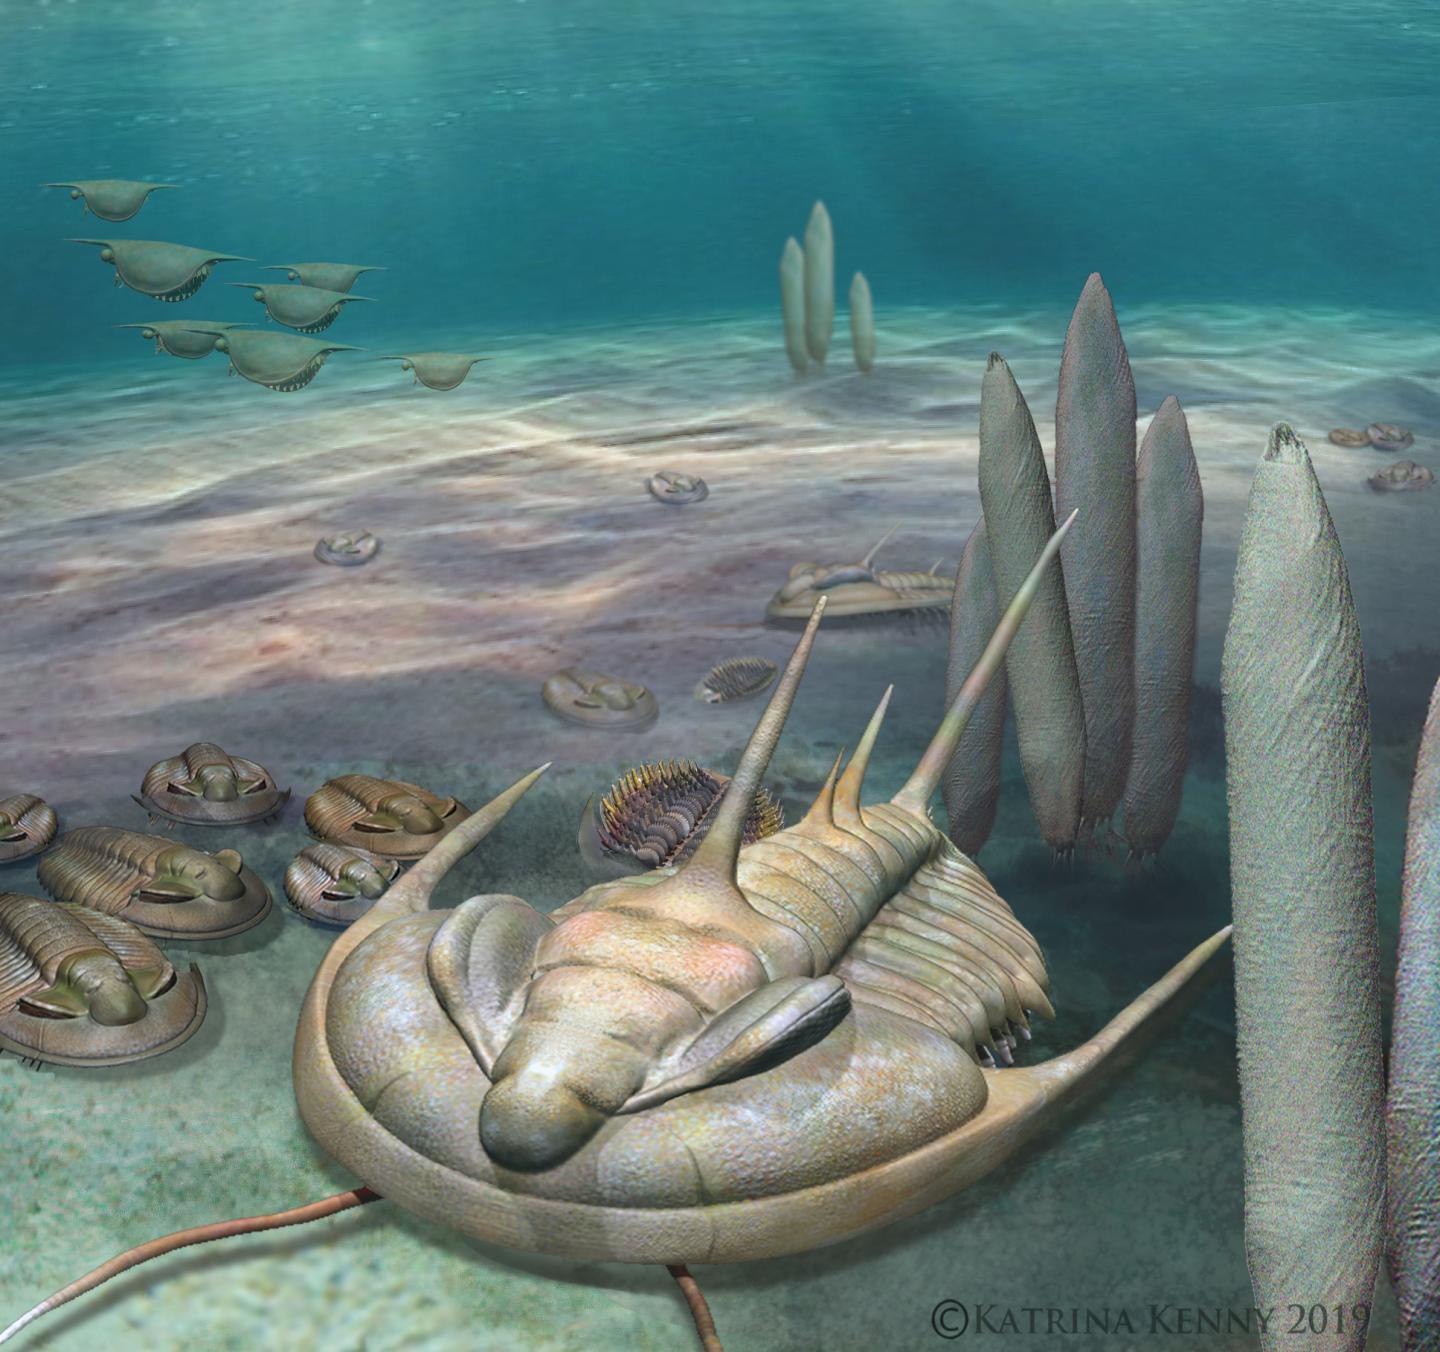 New 'King' of Fossils